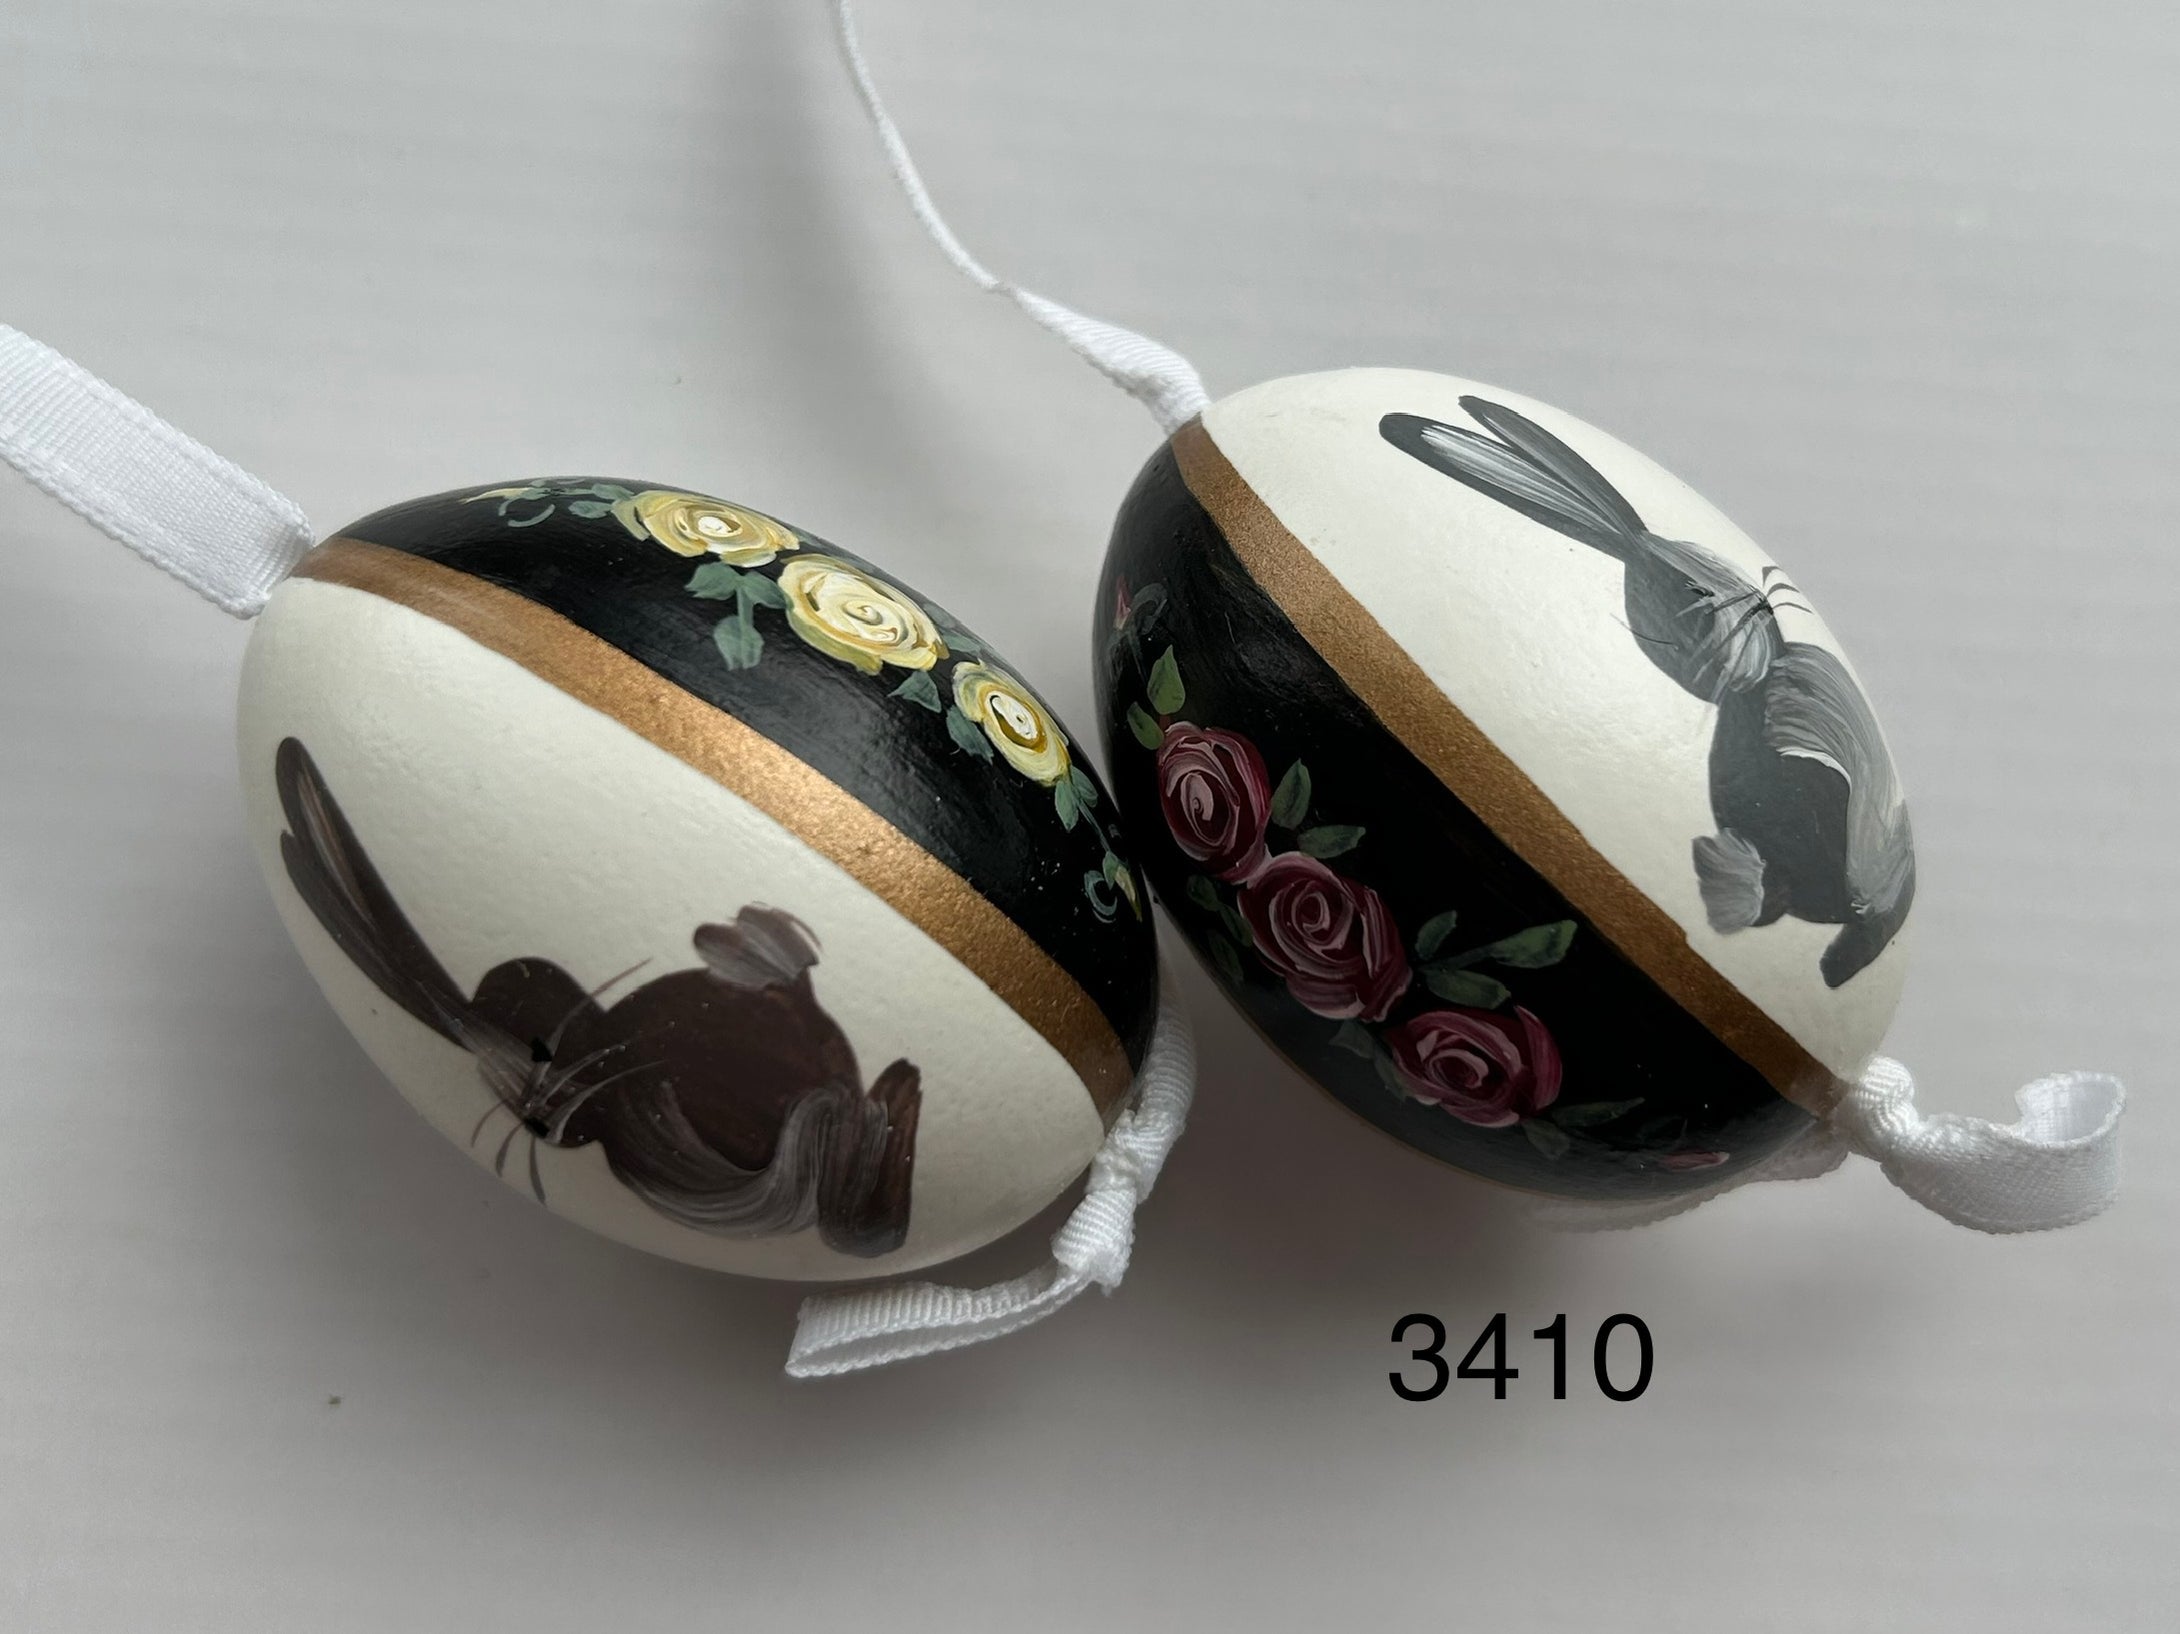 Peter's Hand Painted Egg from Austria 3410